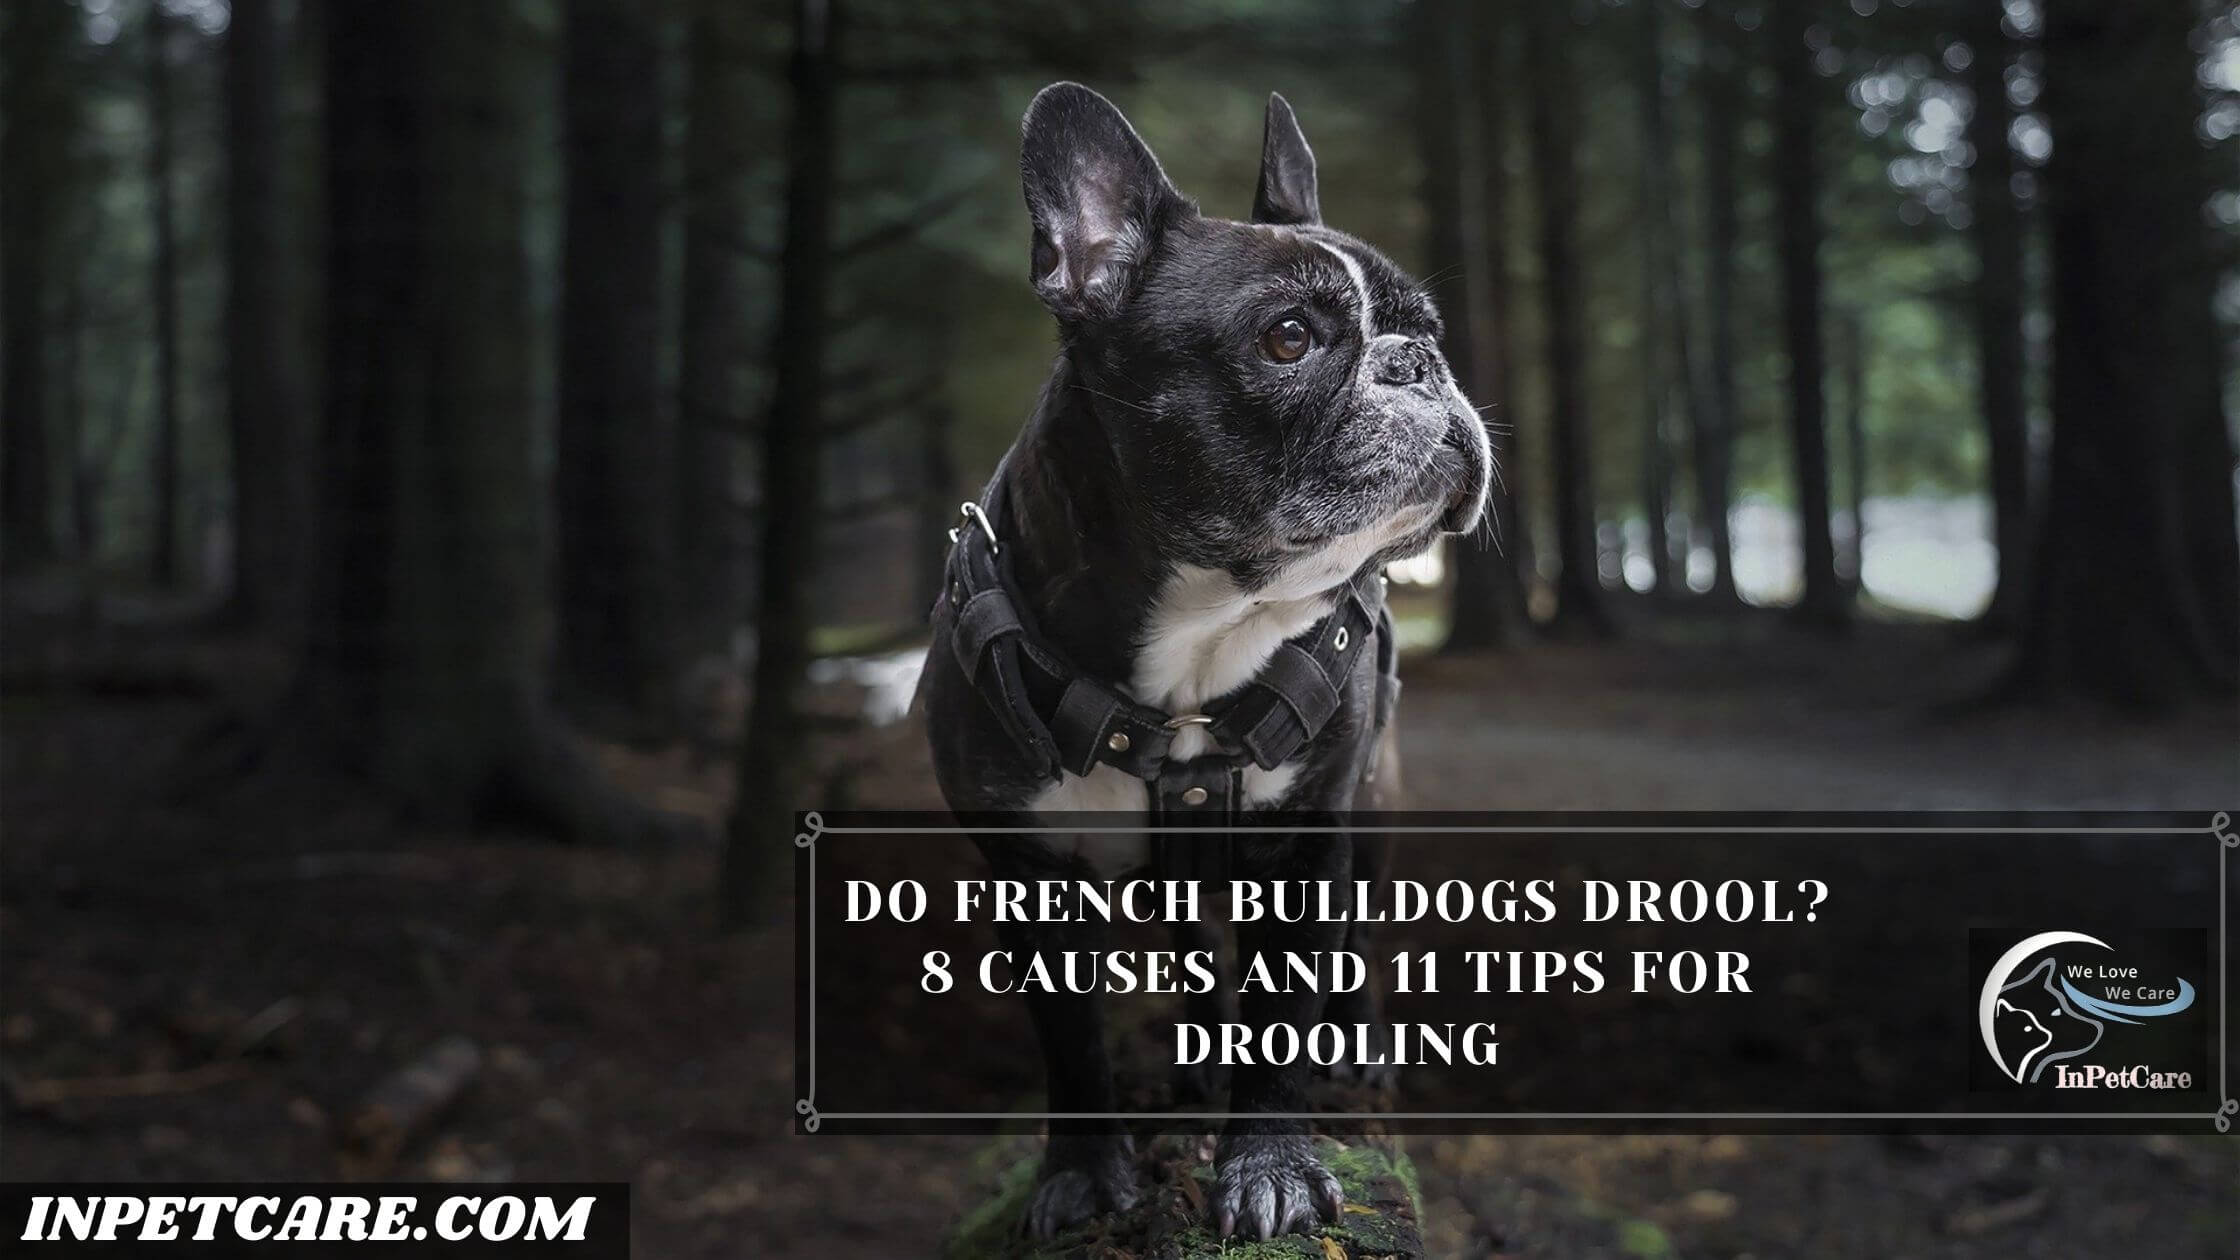 Do French Bulldogs Drool? 8 Causes And 11 Tips For Drooling